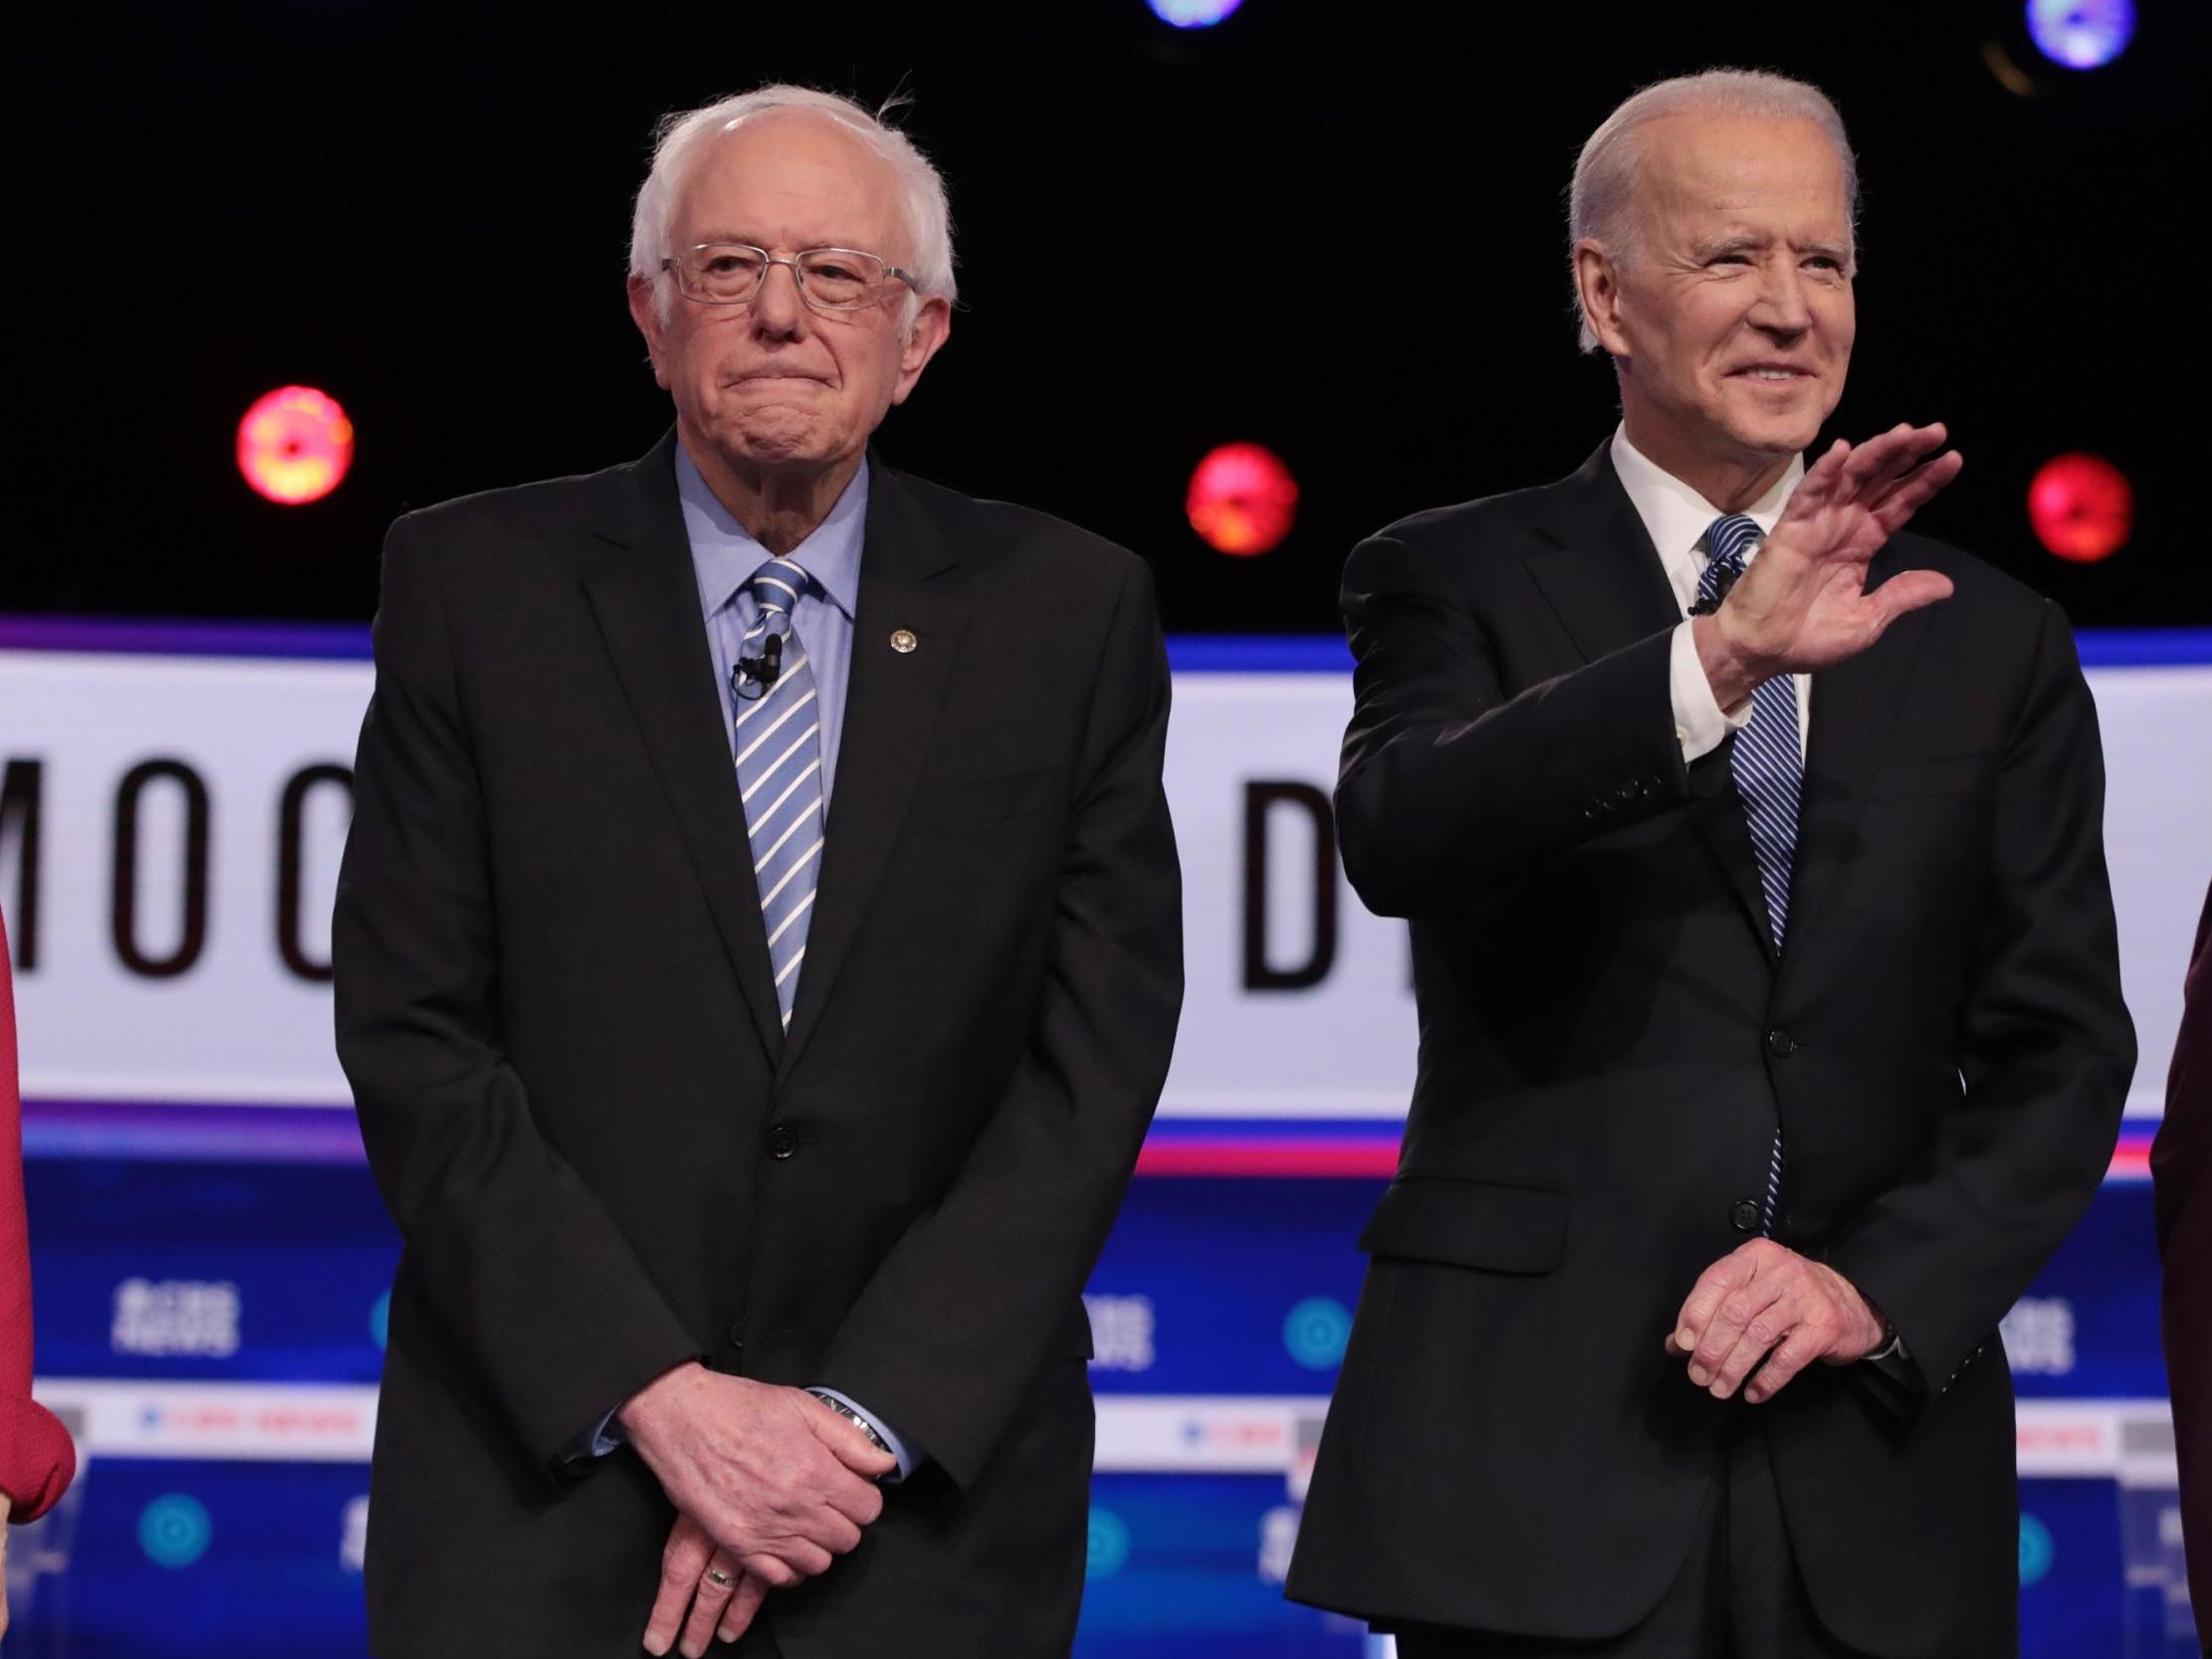 The Democratic field has narrowed to Bernie Sanders and Joe Biden competing for the party's nomination after a dramatic round of withdrawals from the race.